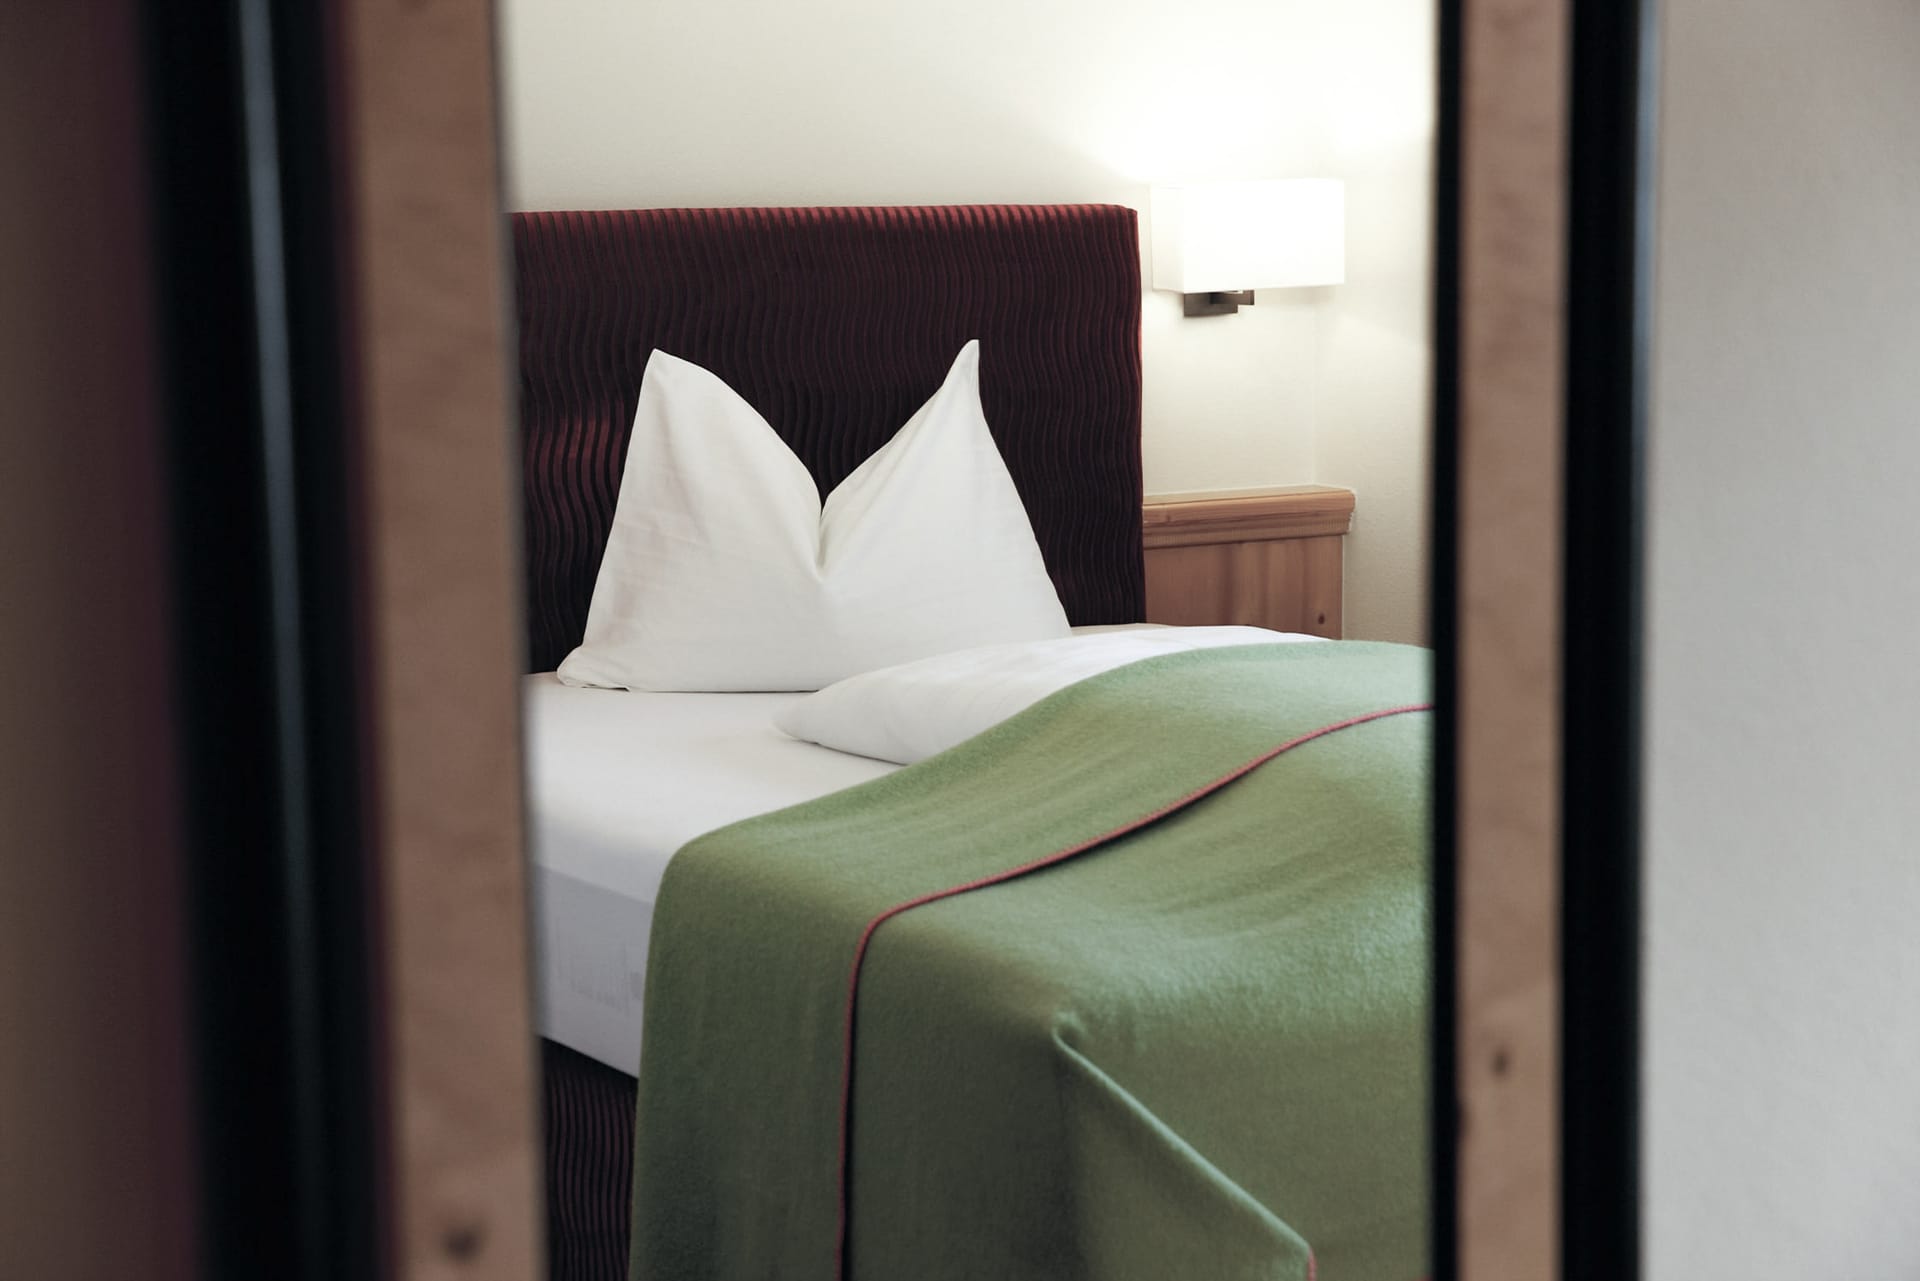 A neatly made bed with white linens and triangular folded pillows reflected in a mirror in a cozy hotel room.